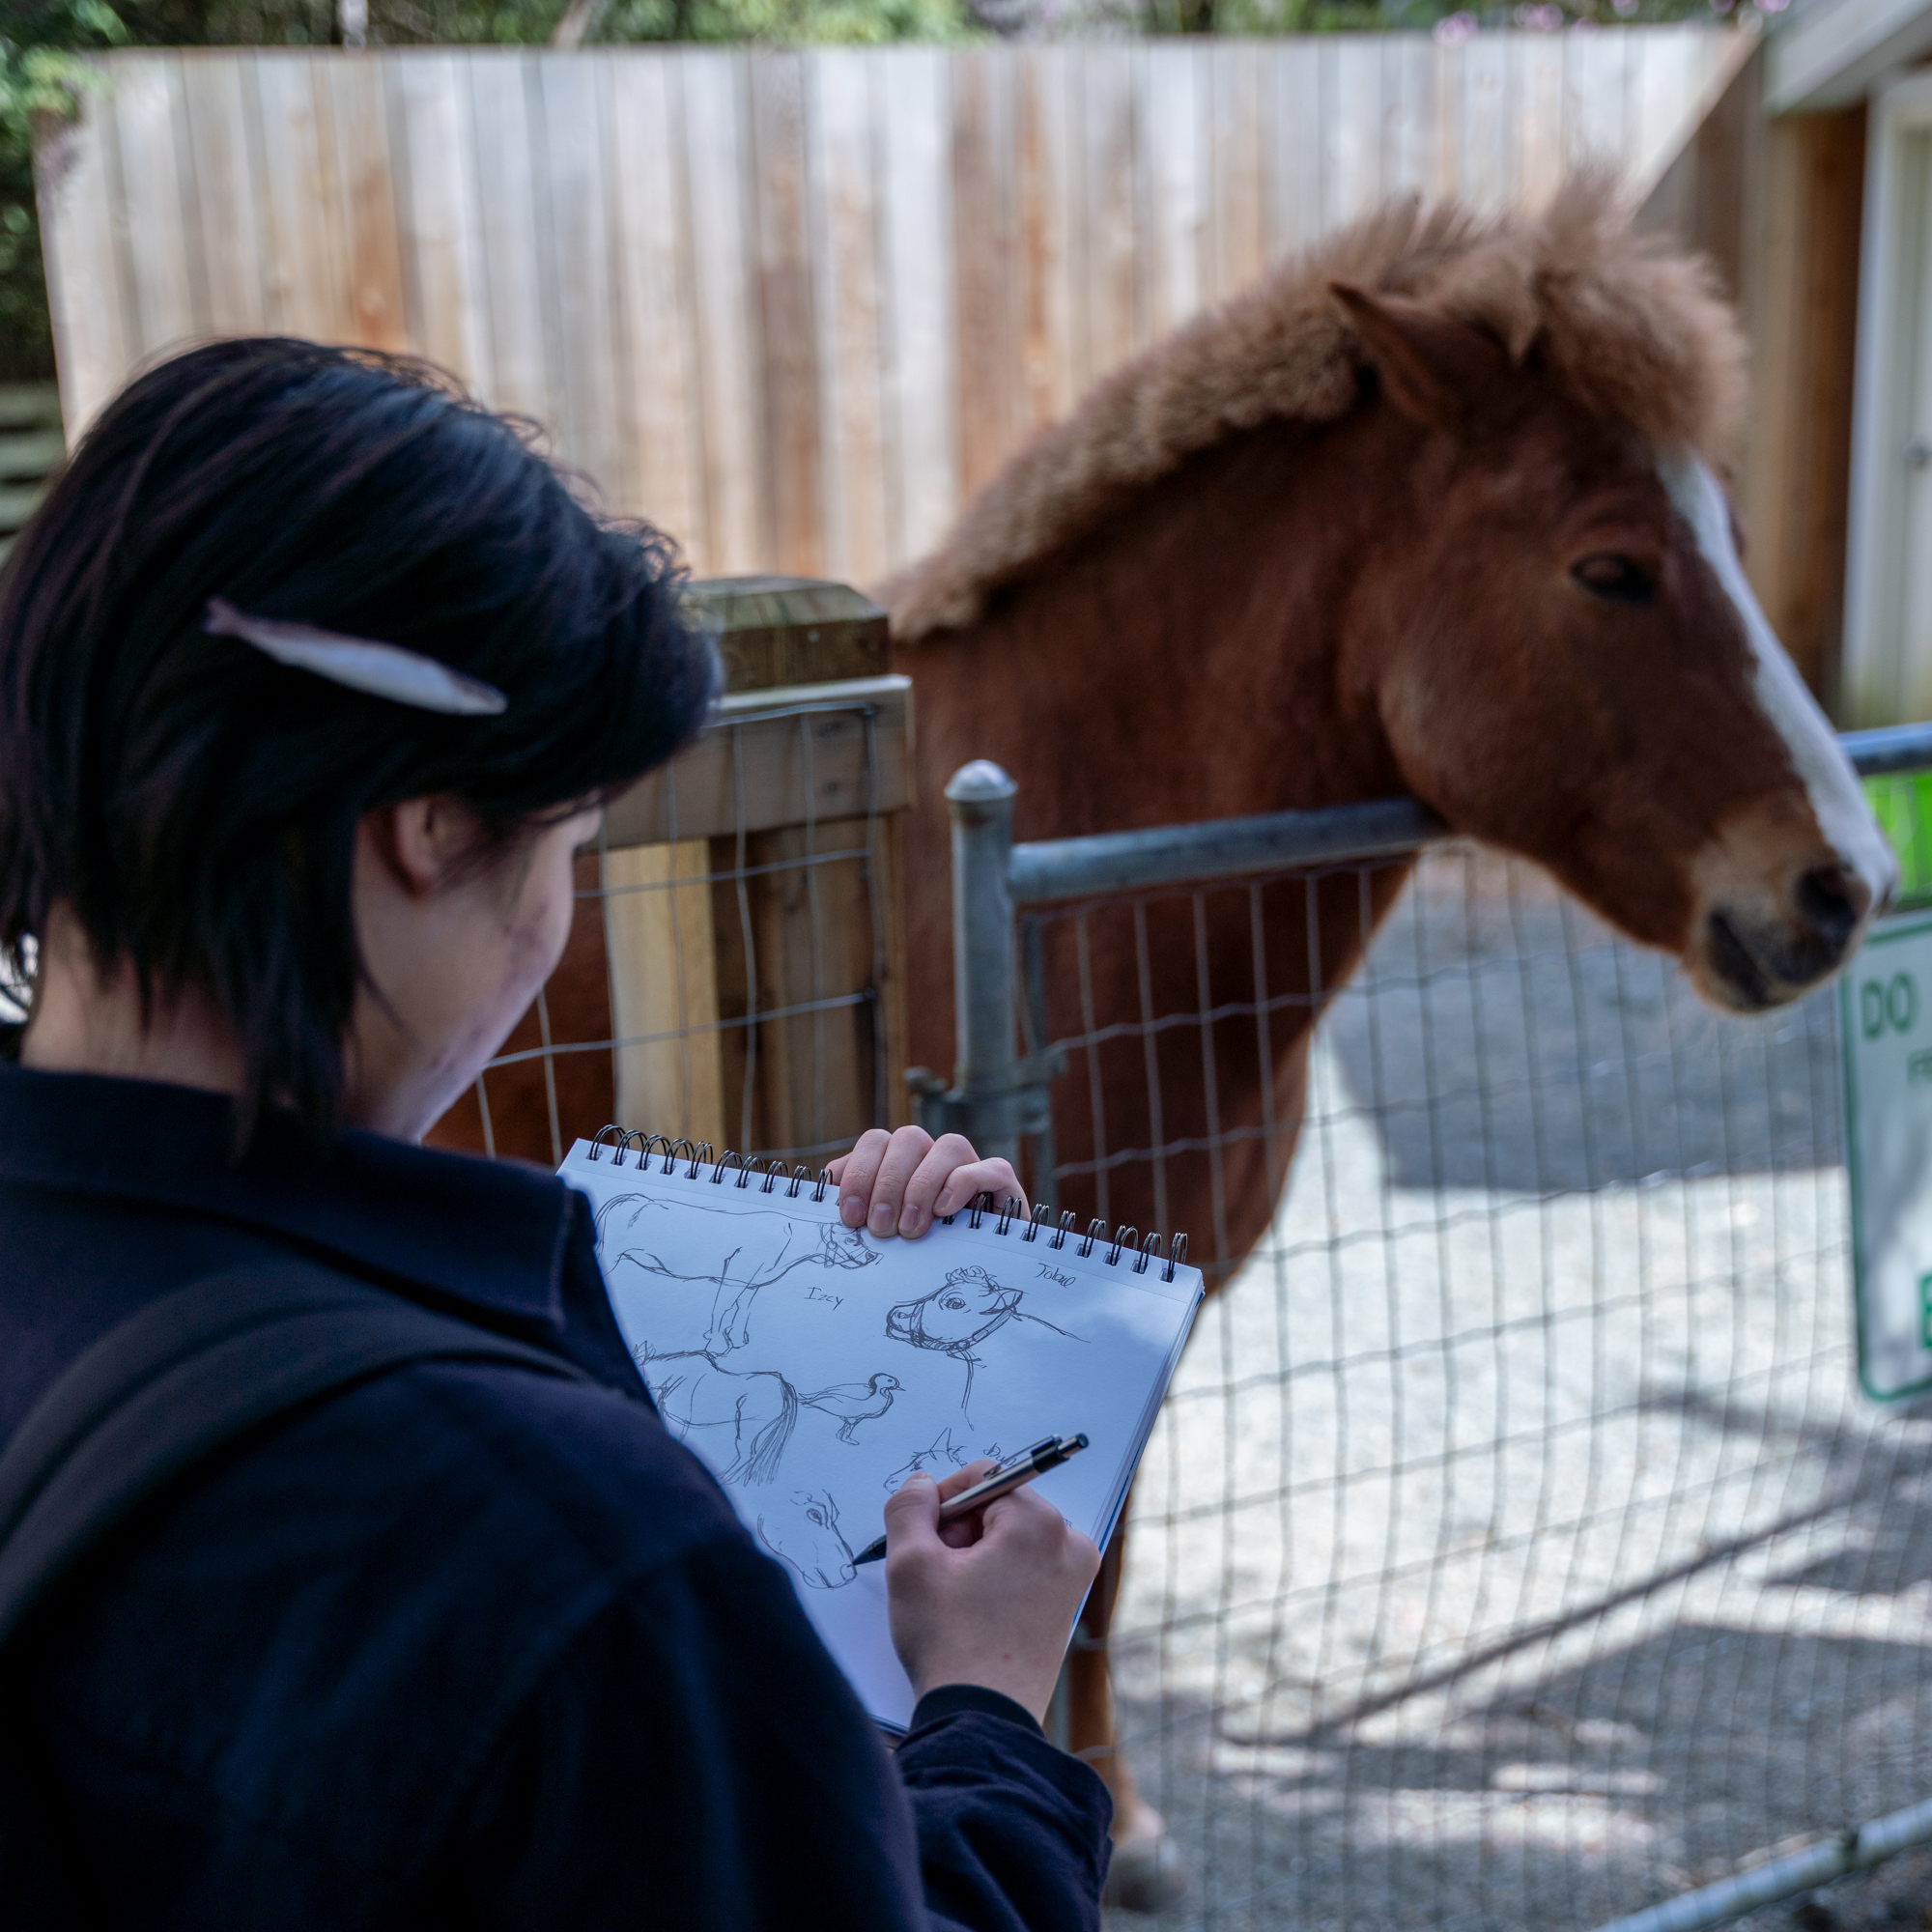 VanArts Animation Student Sketching a Horse's Head